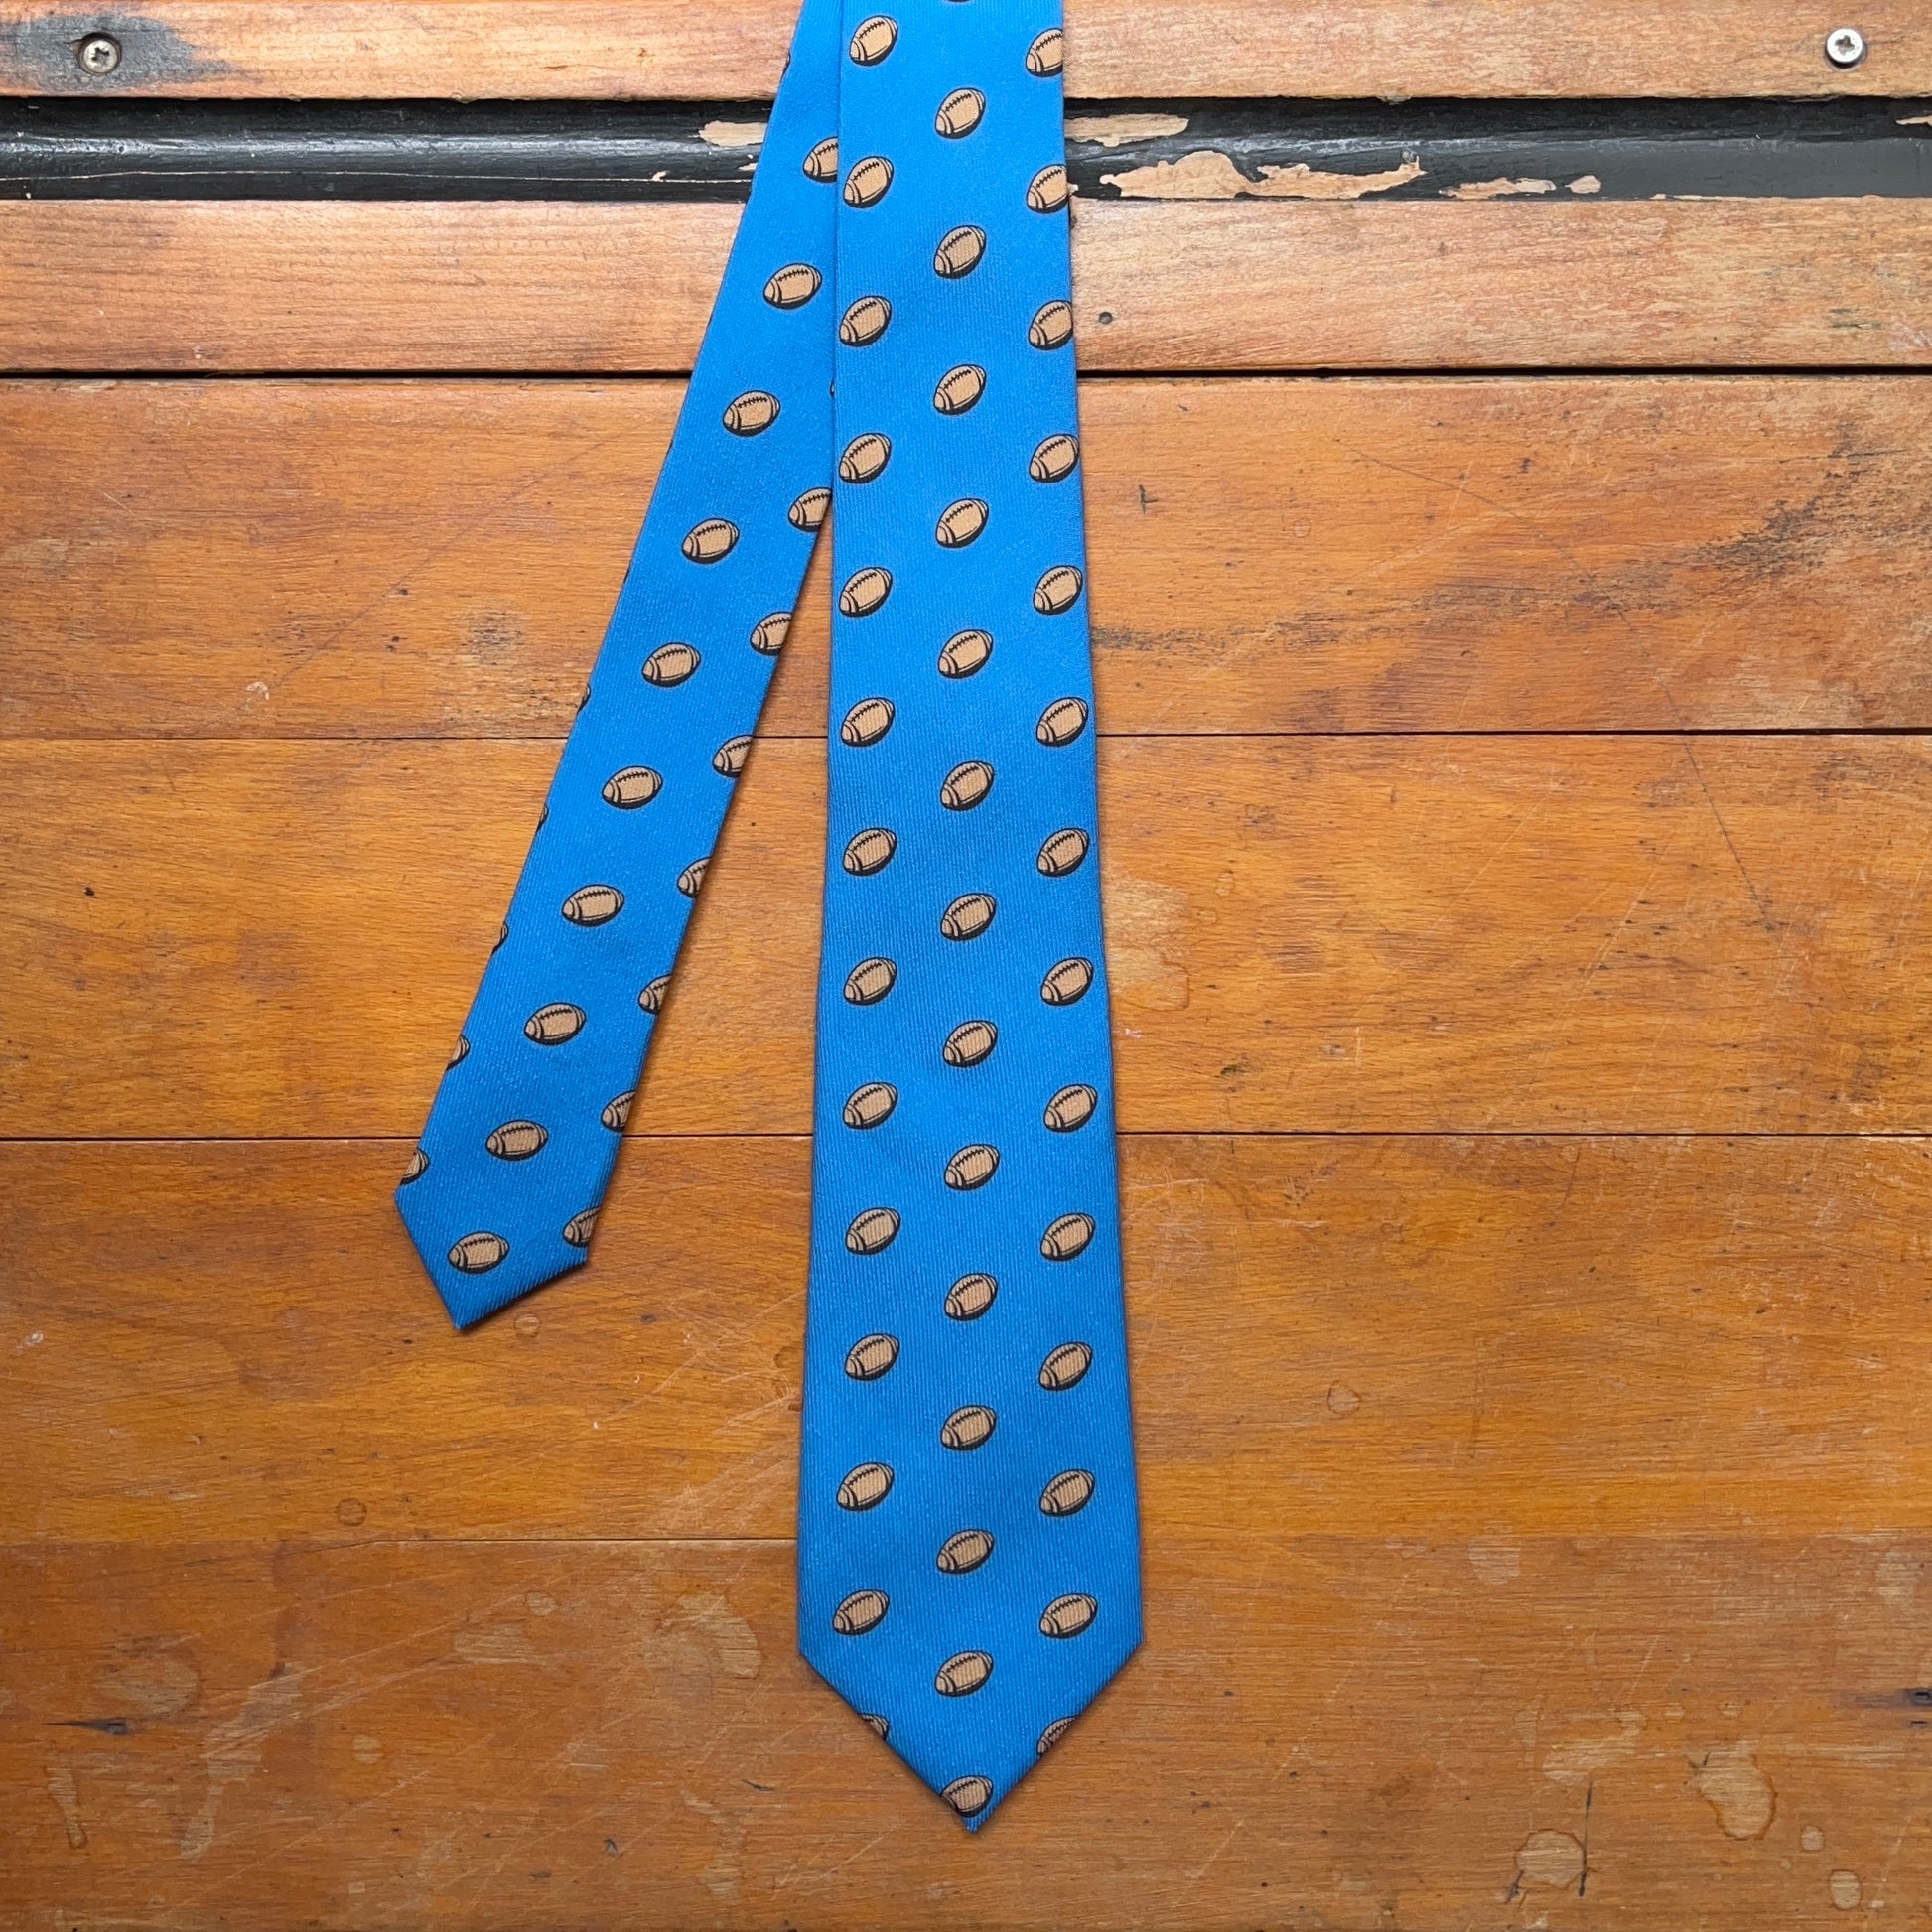 Blue regent tie made from woven wool with rugby ball print pattern